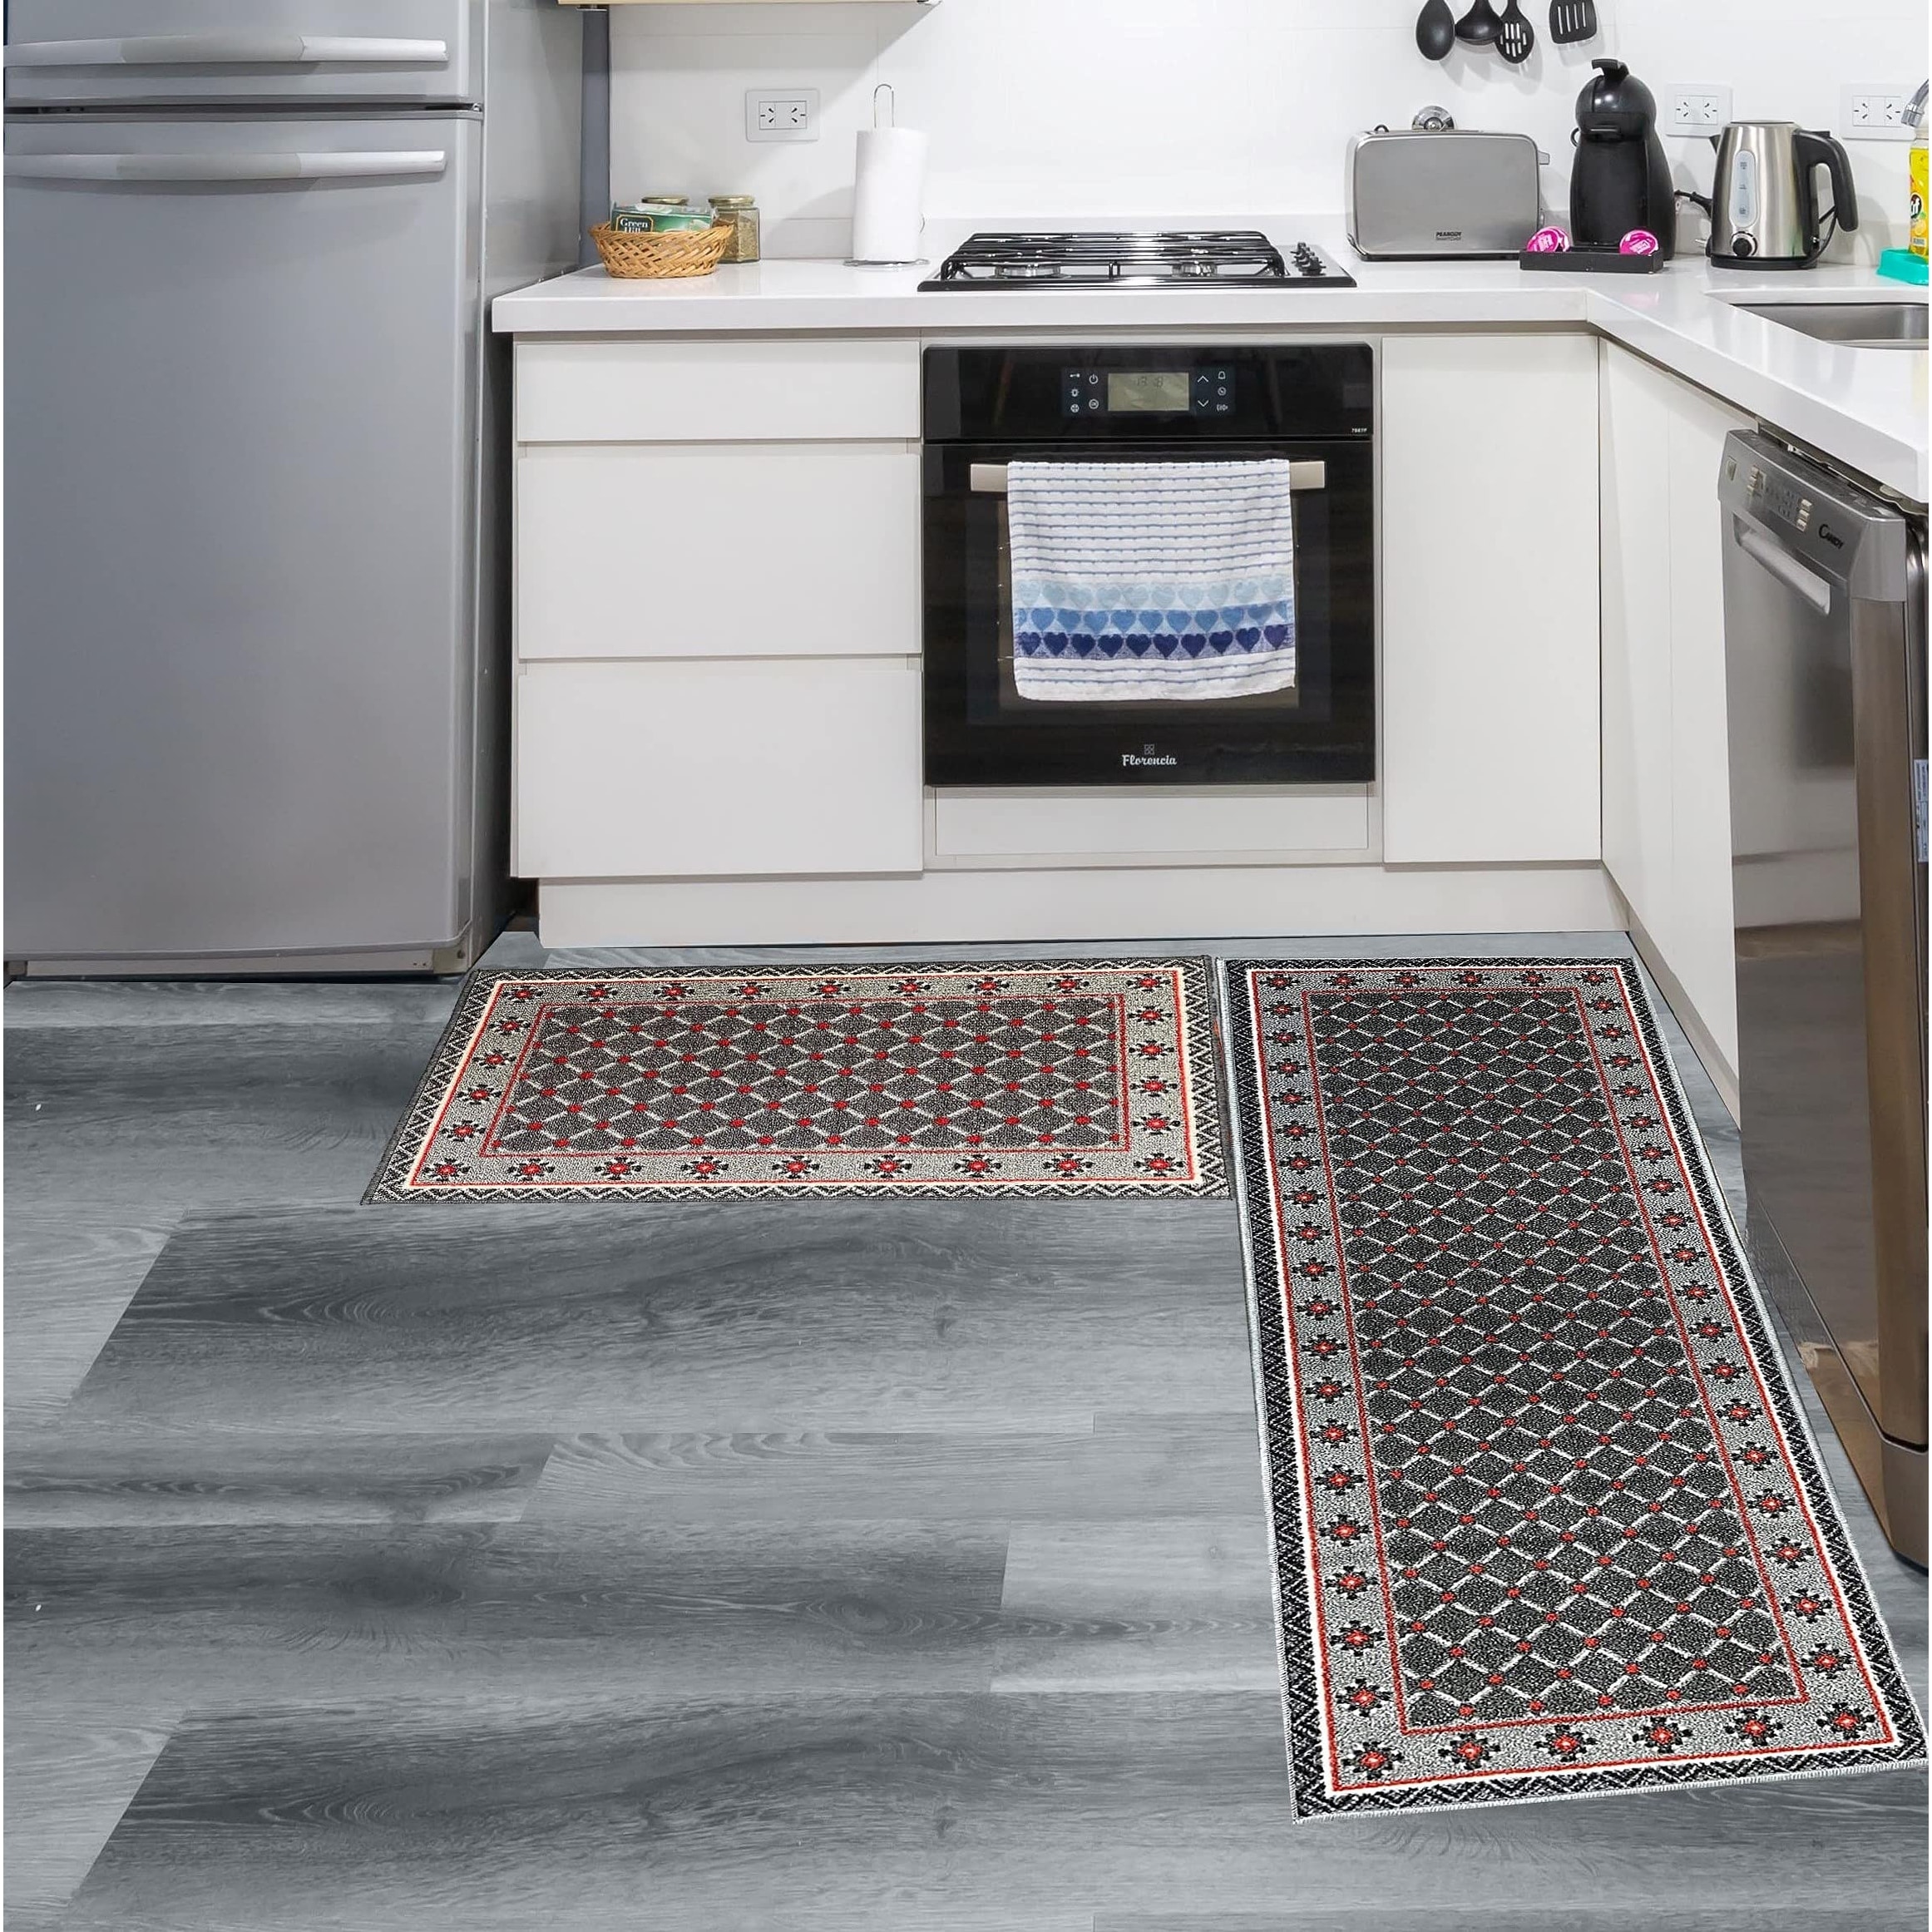 Kitchen Rugs Set of 2- Red, Black, and Grey Modern Geometric Non-Slip  Washable Floor Mats - Comfort Sink and Laundry Room Runner - Contemporary